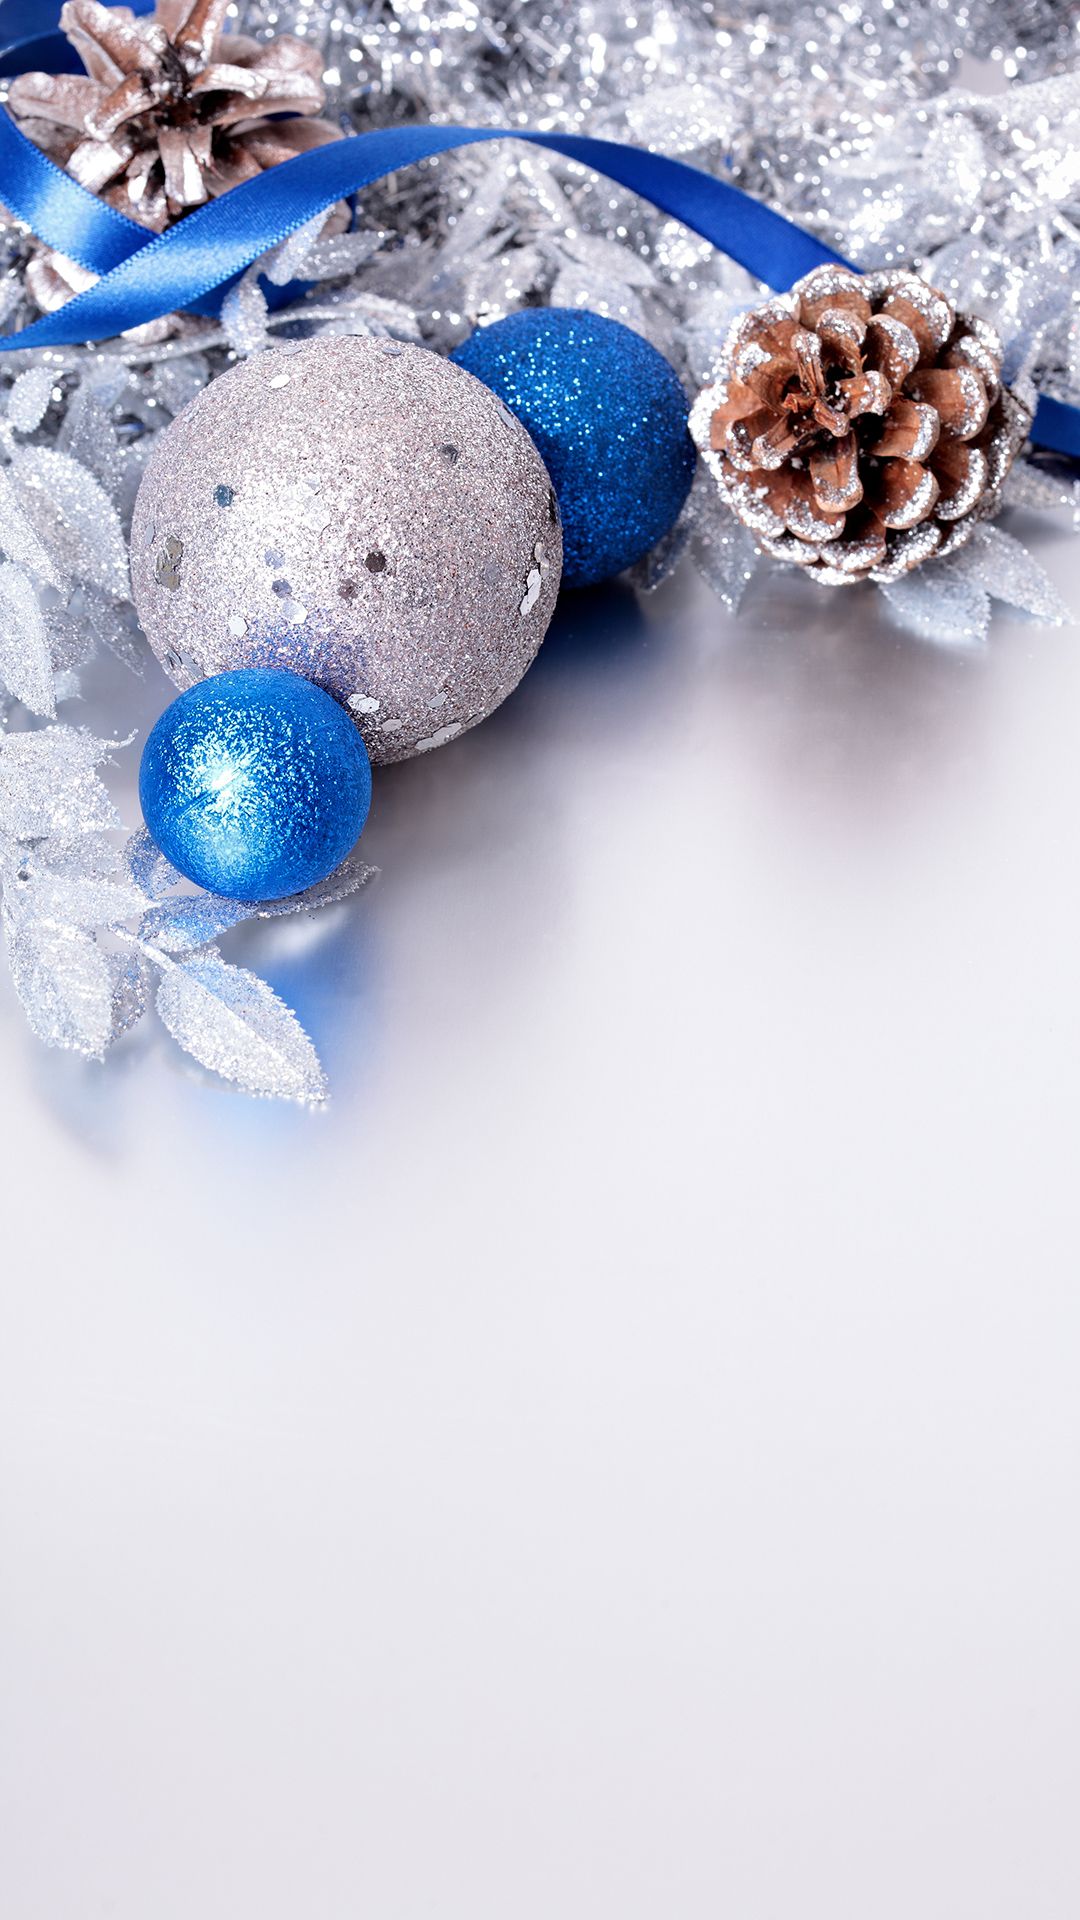 Christmas Silver and Blue iPhone 6S Plus Wallpaper​-Qual. Wallpaper iphone christmas, Christmas wallpaper, Christmas phone wallpaper